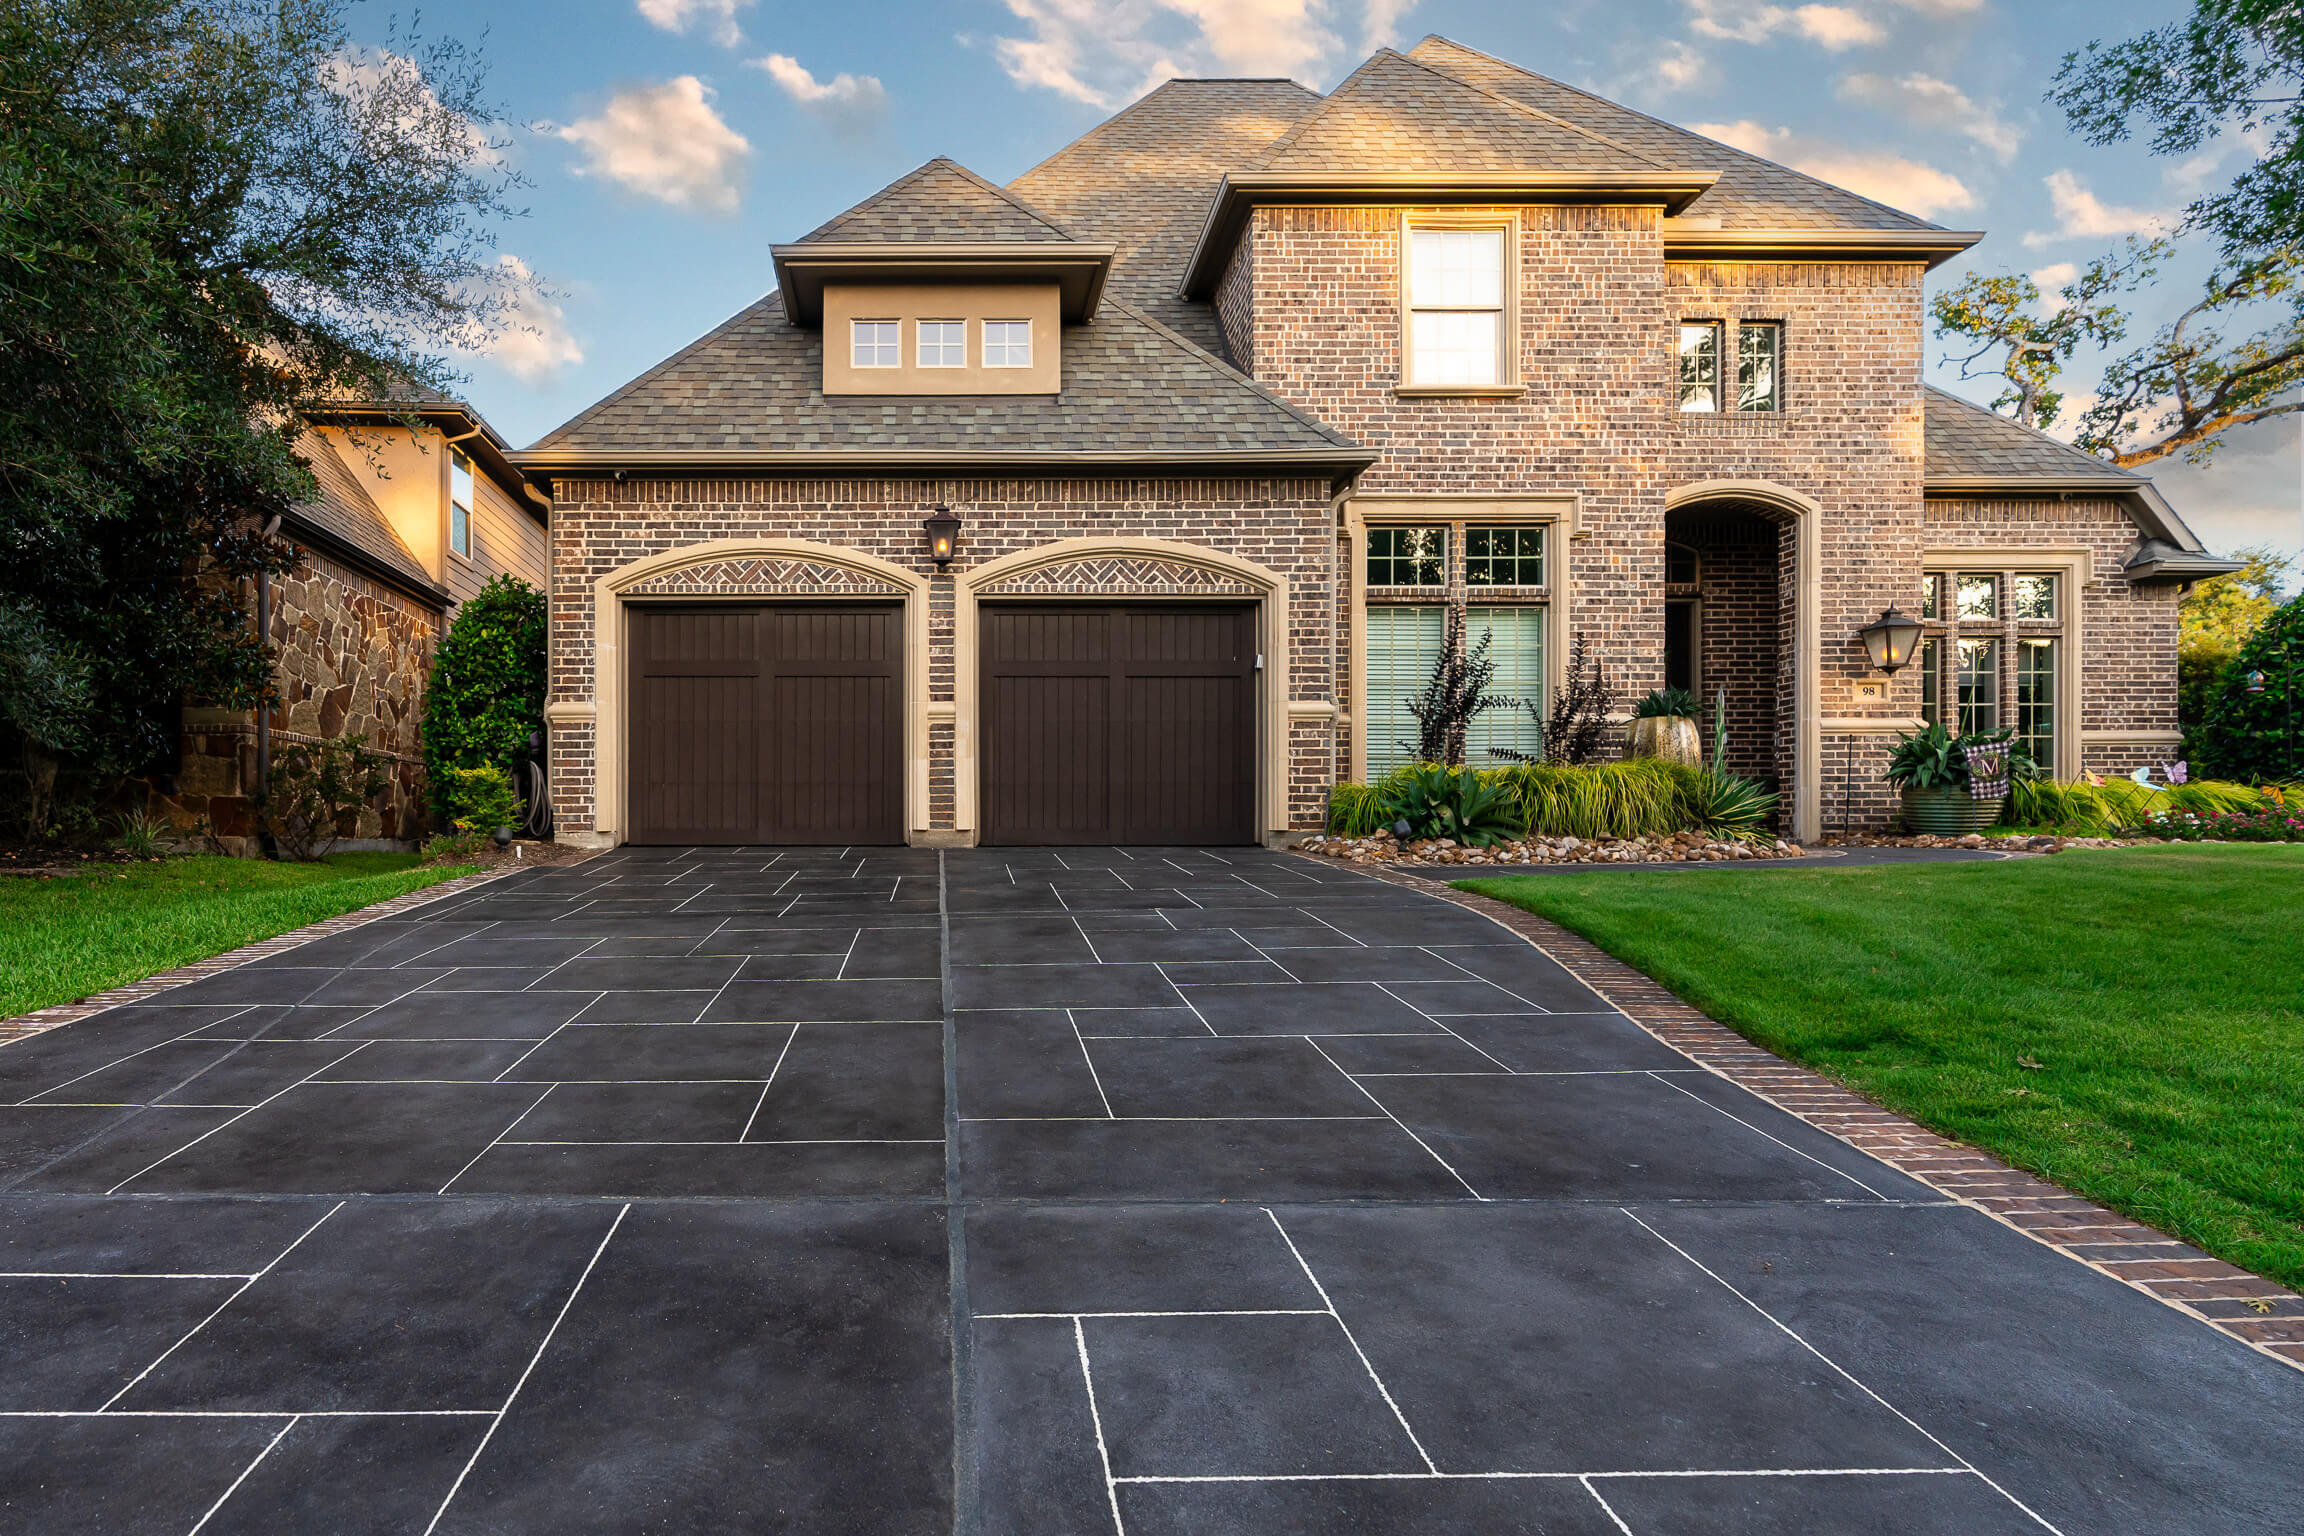 Inspiring Driveway and Walkway Design Gallery | Get Inspired by ...